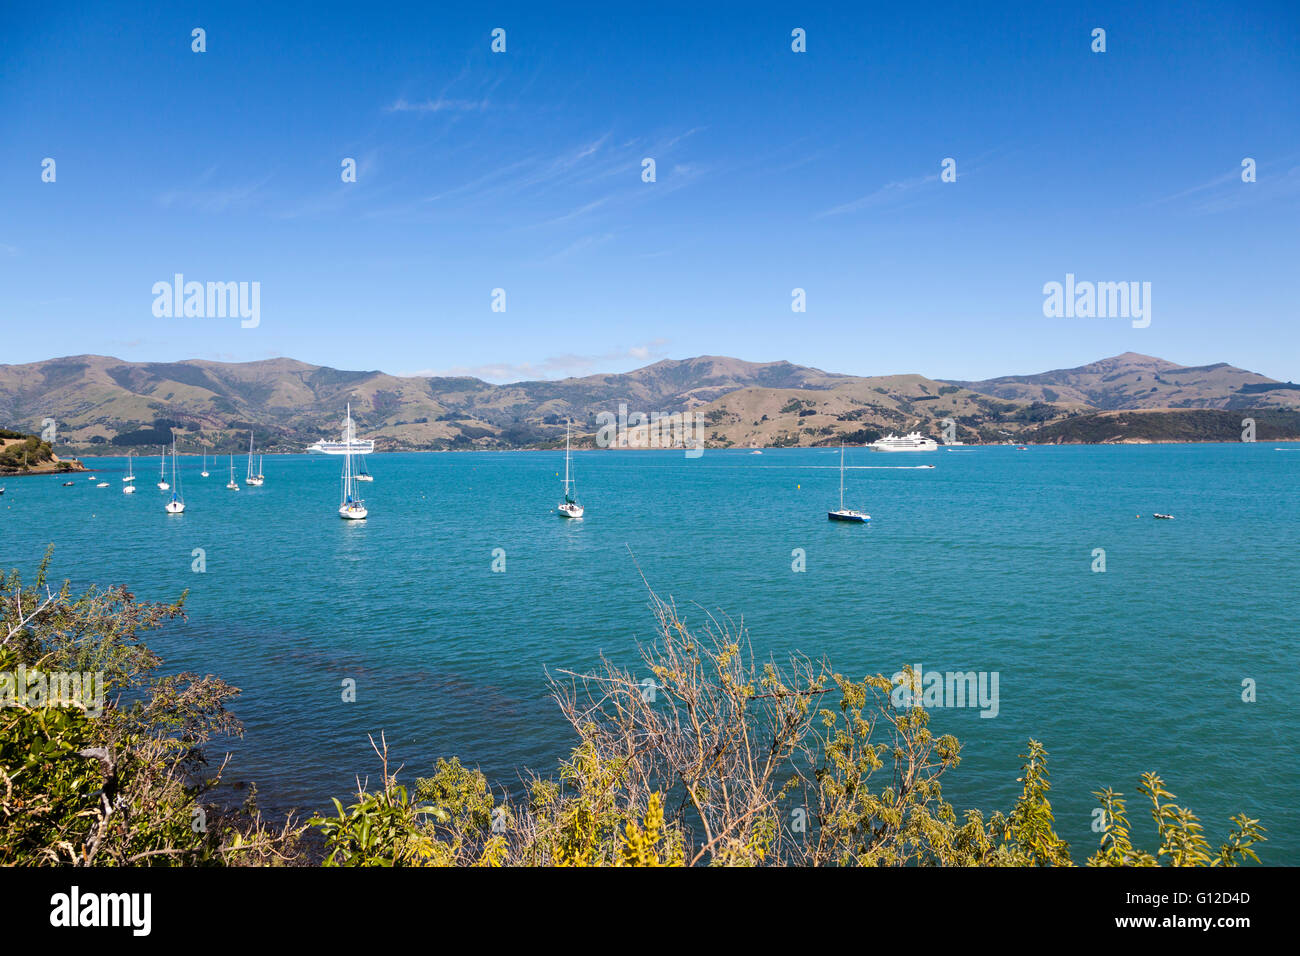 Akaroa Harbour, with Le Soleal and the Golden Princess cruise ships in the background, New Zealand Stock Photo